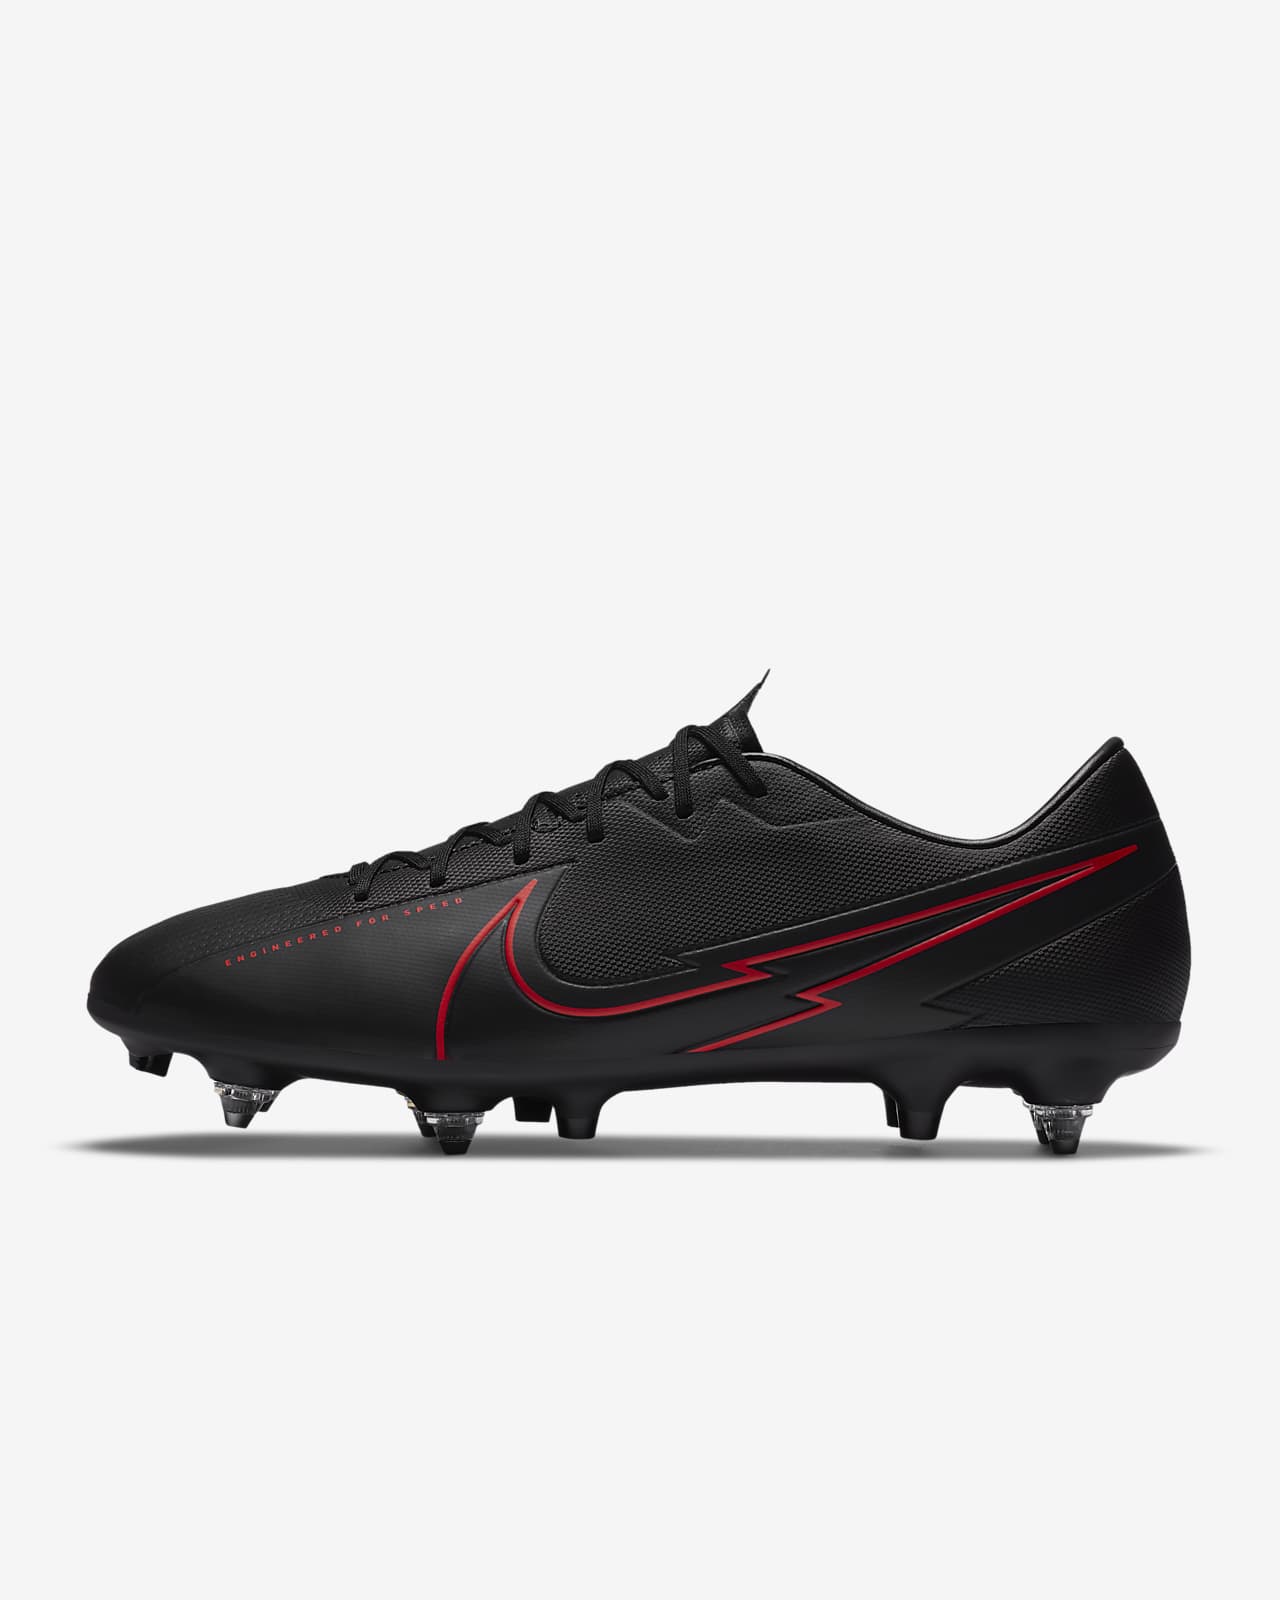 nike metal studs soccer boots